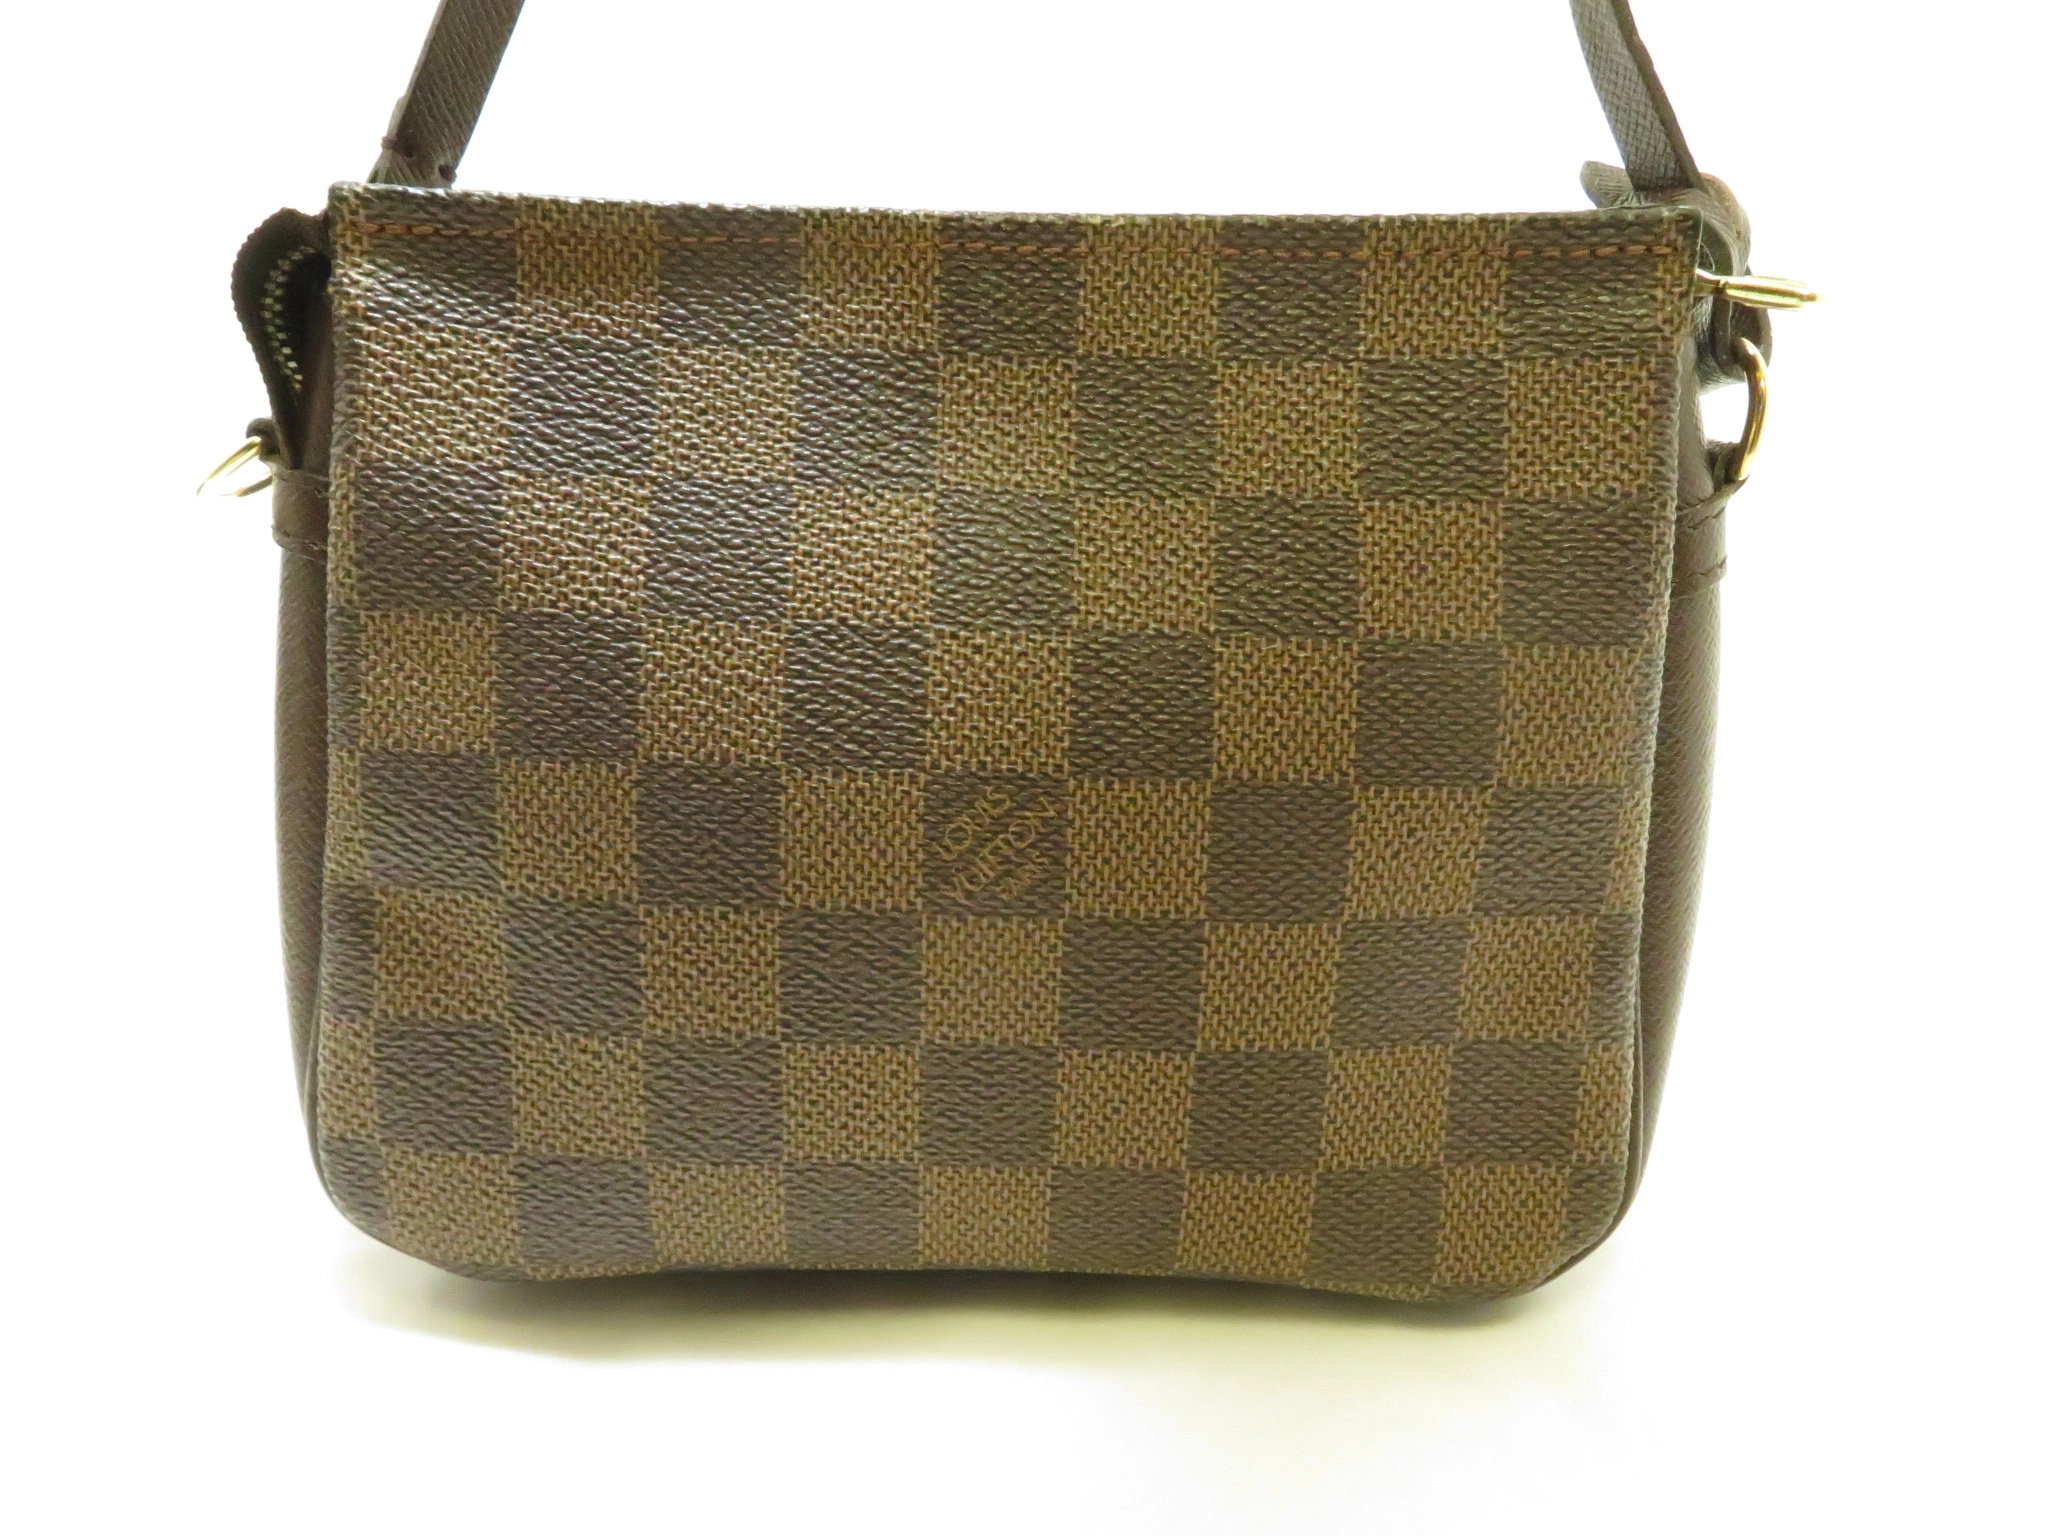 LOUIS VUITTON ルイヴィトン トゥルース・メイクアップ ダミエ N51982